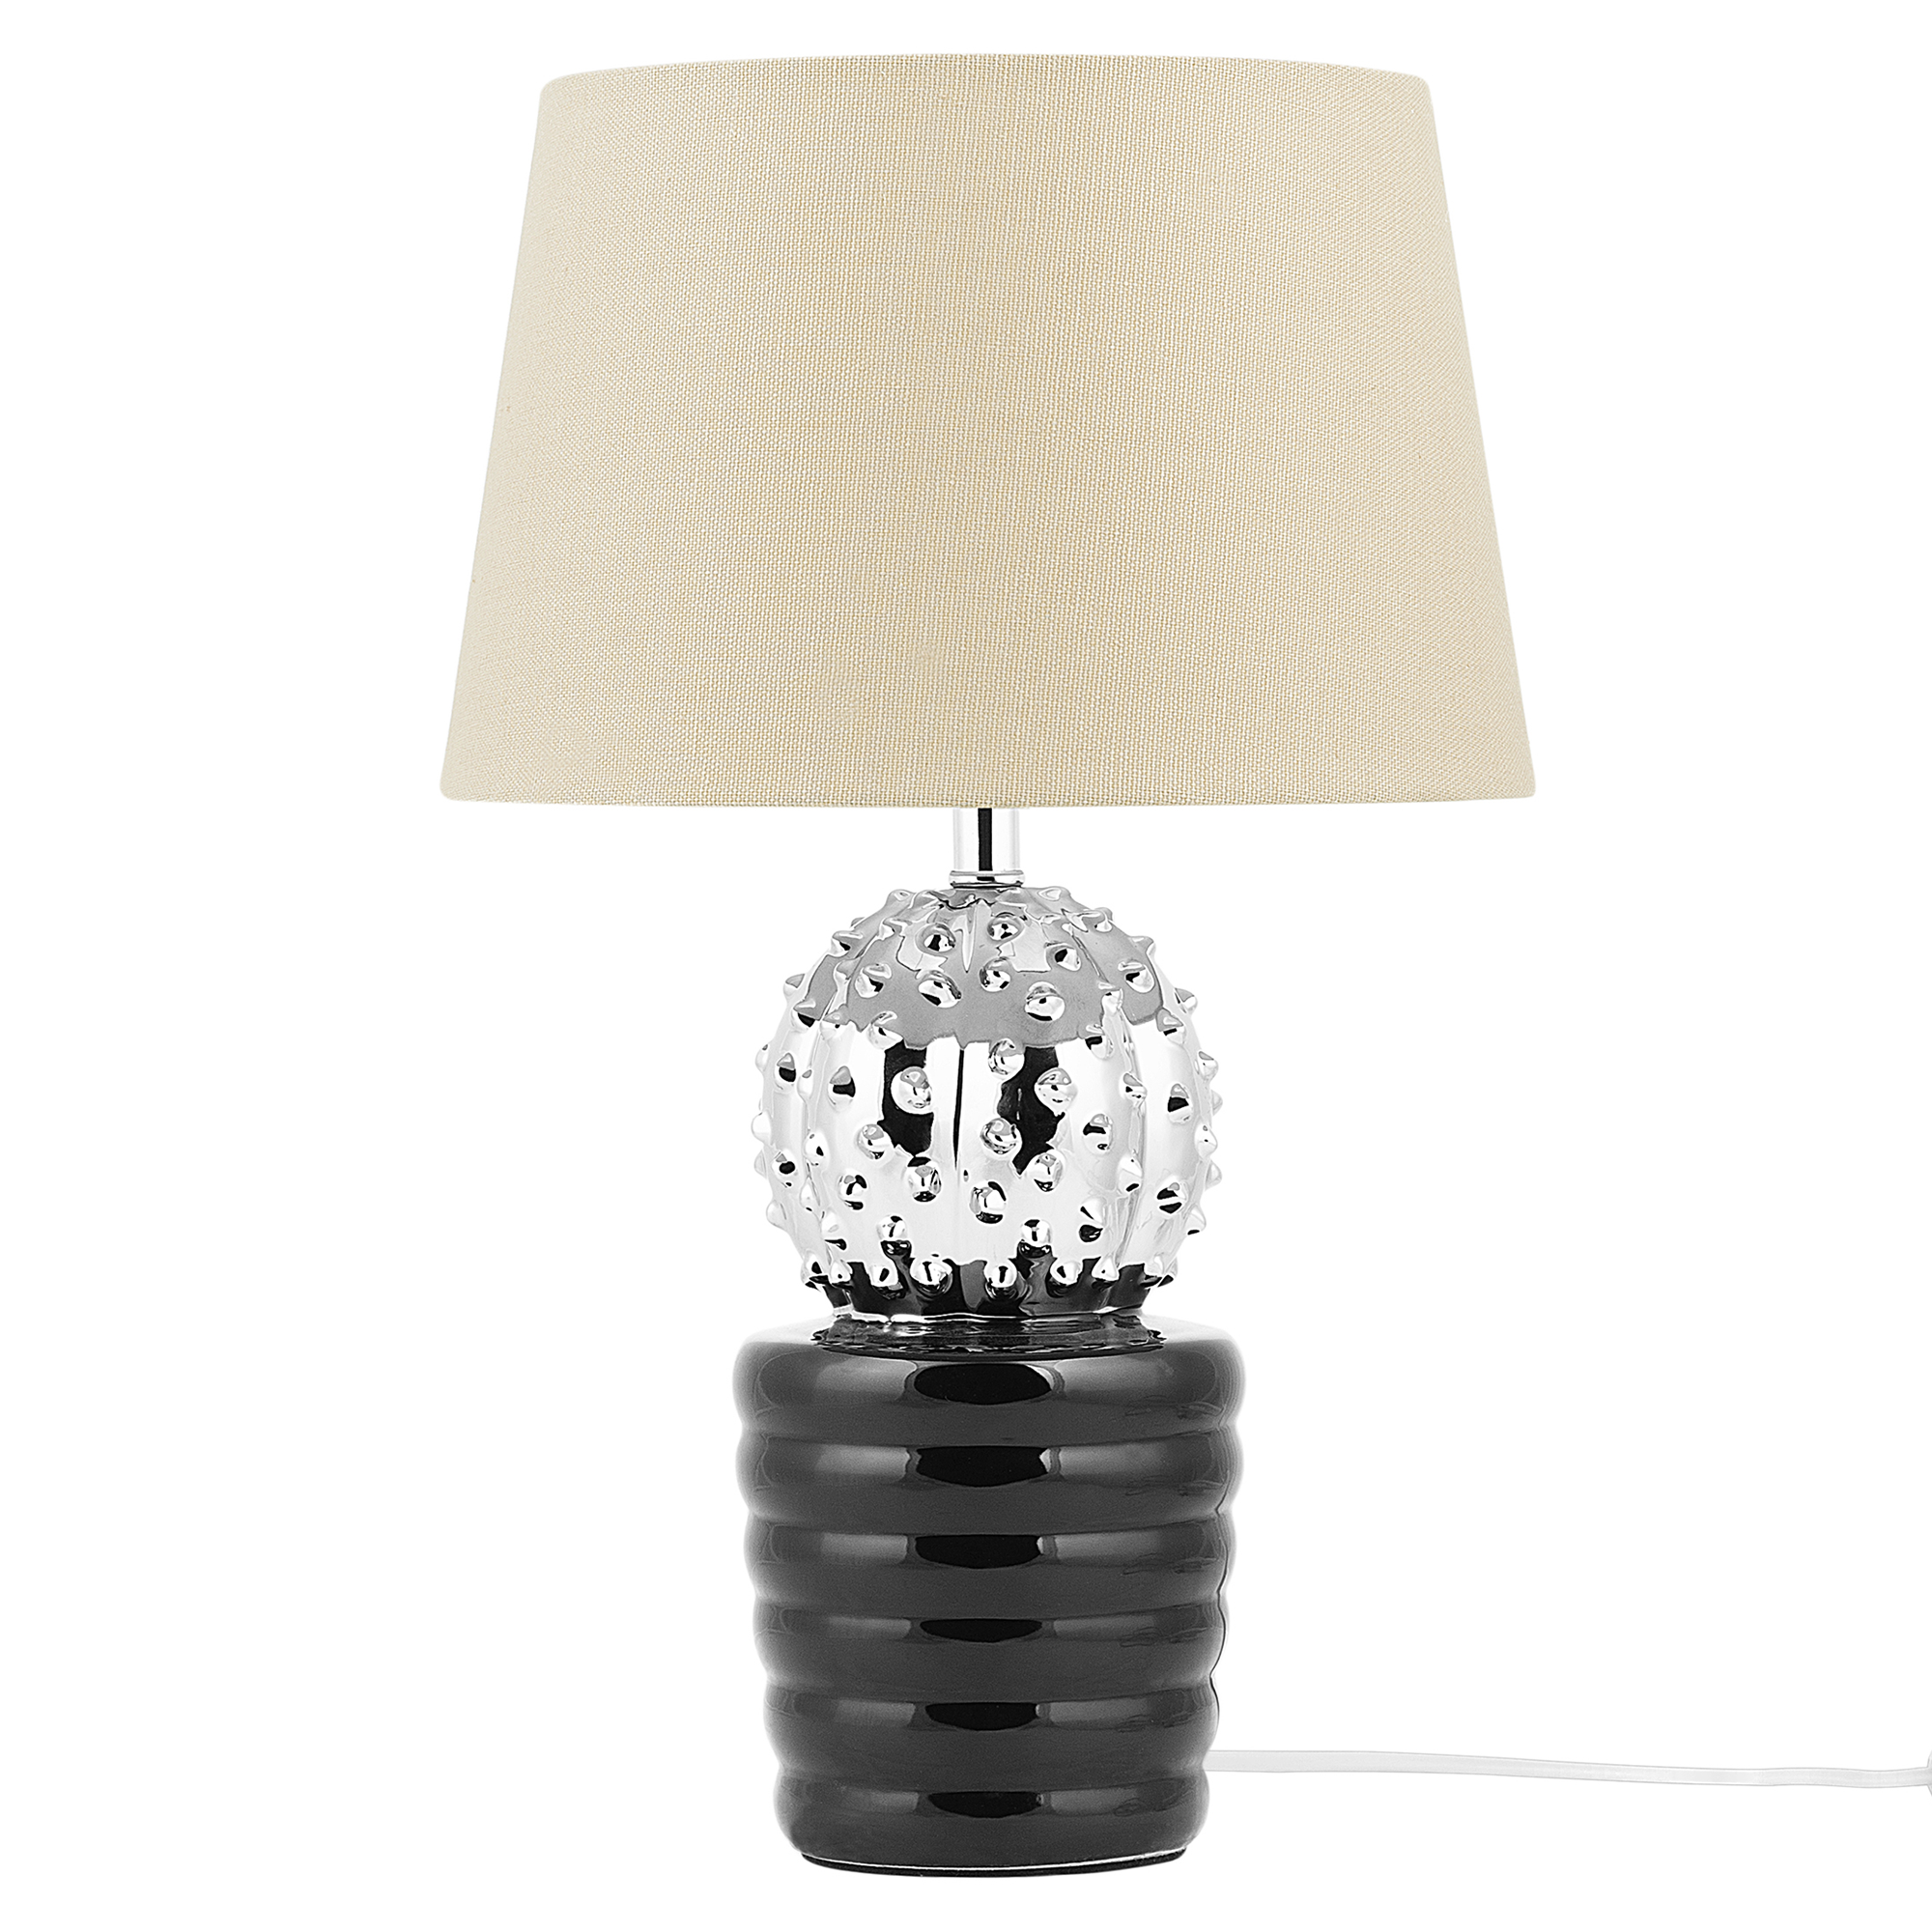 Beliani Table Lamp Silver with Black and Beige Ceramic Eclectic Base Polyester Empire Shade Modern Design